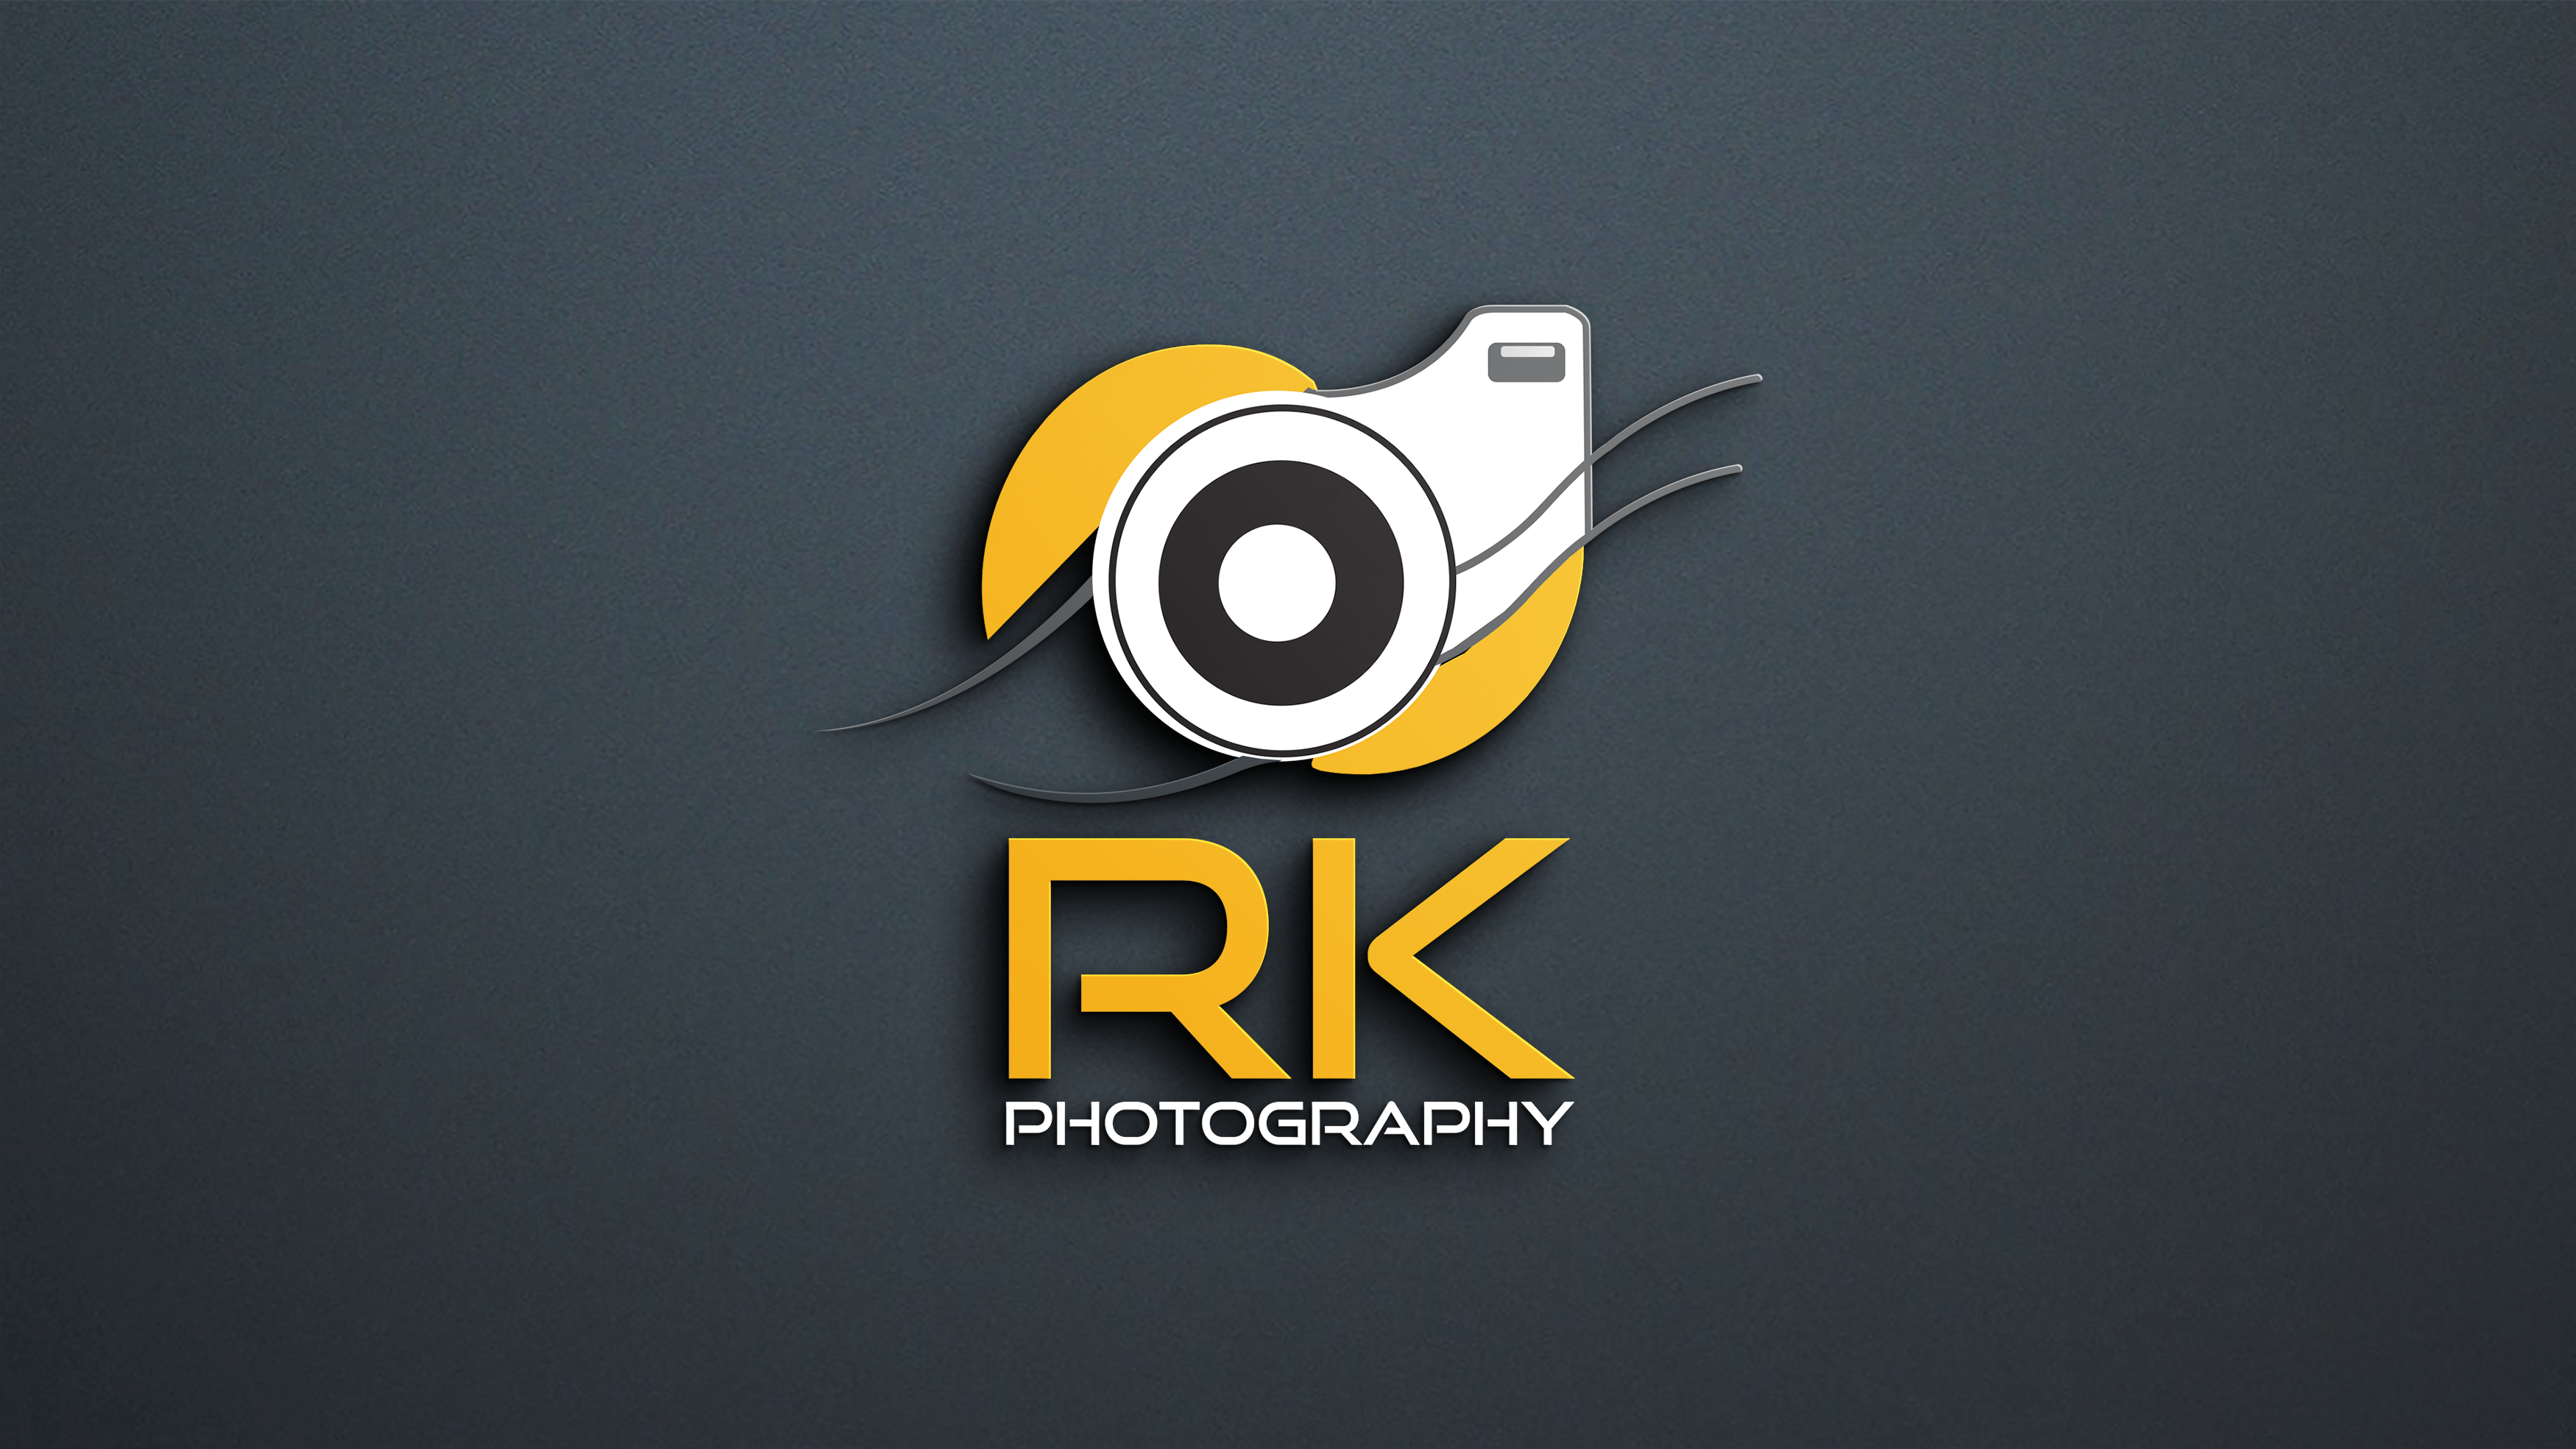 Rk letter photography logo with camera vector